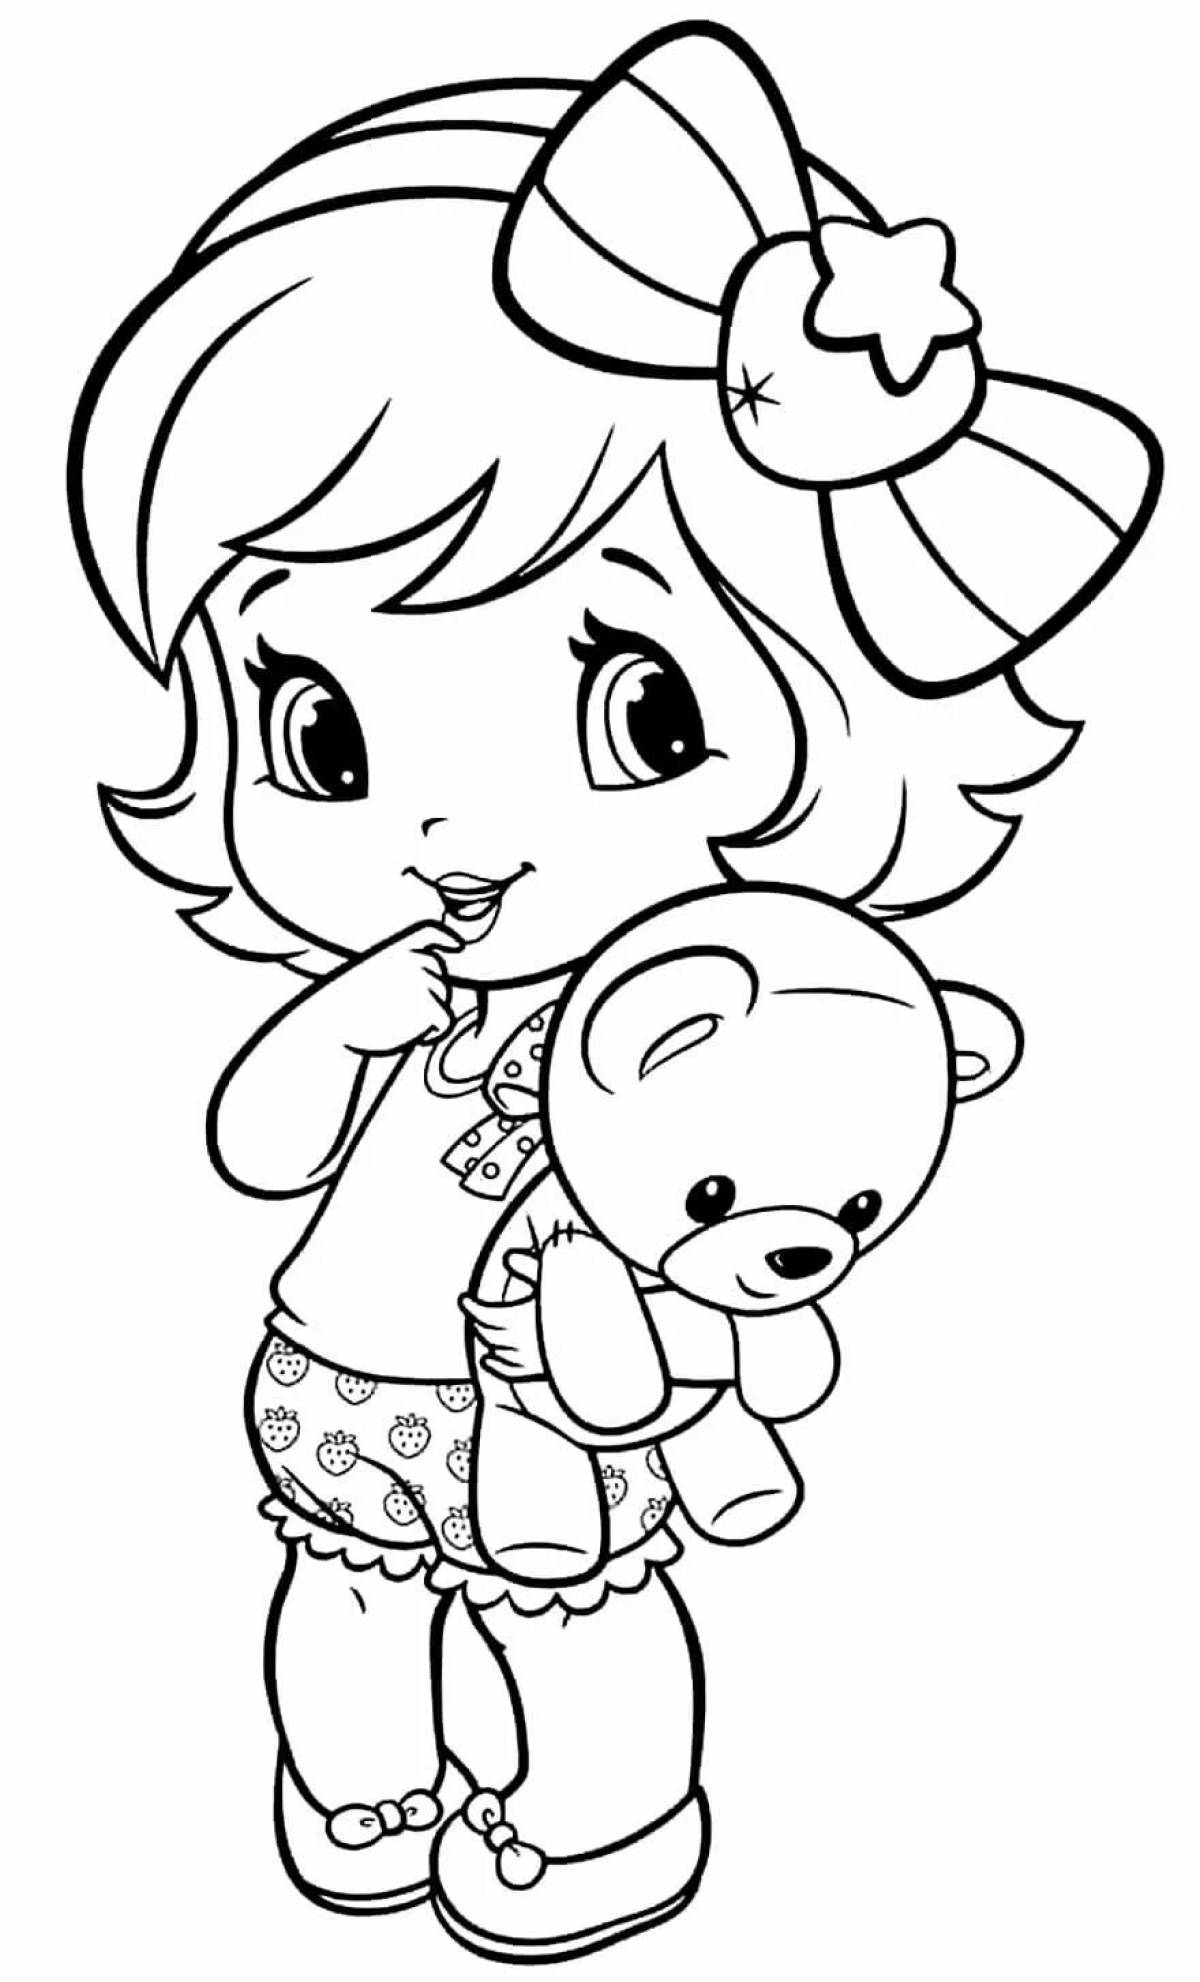 Exquisite coloring pages for girls, small